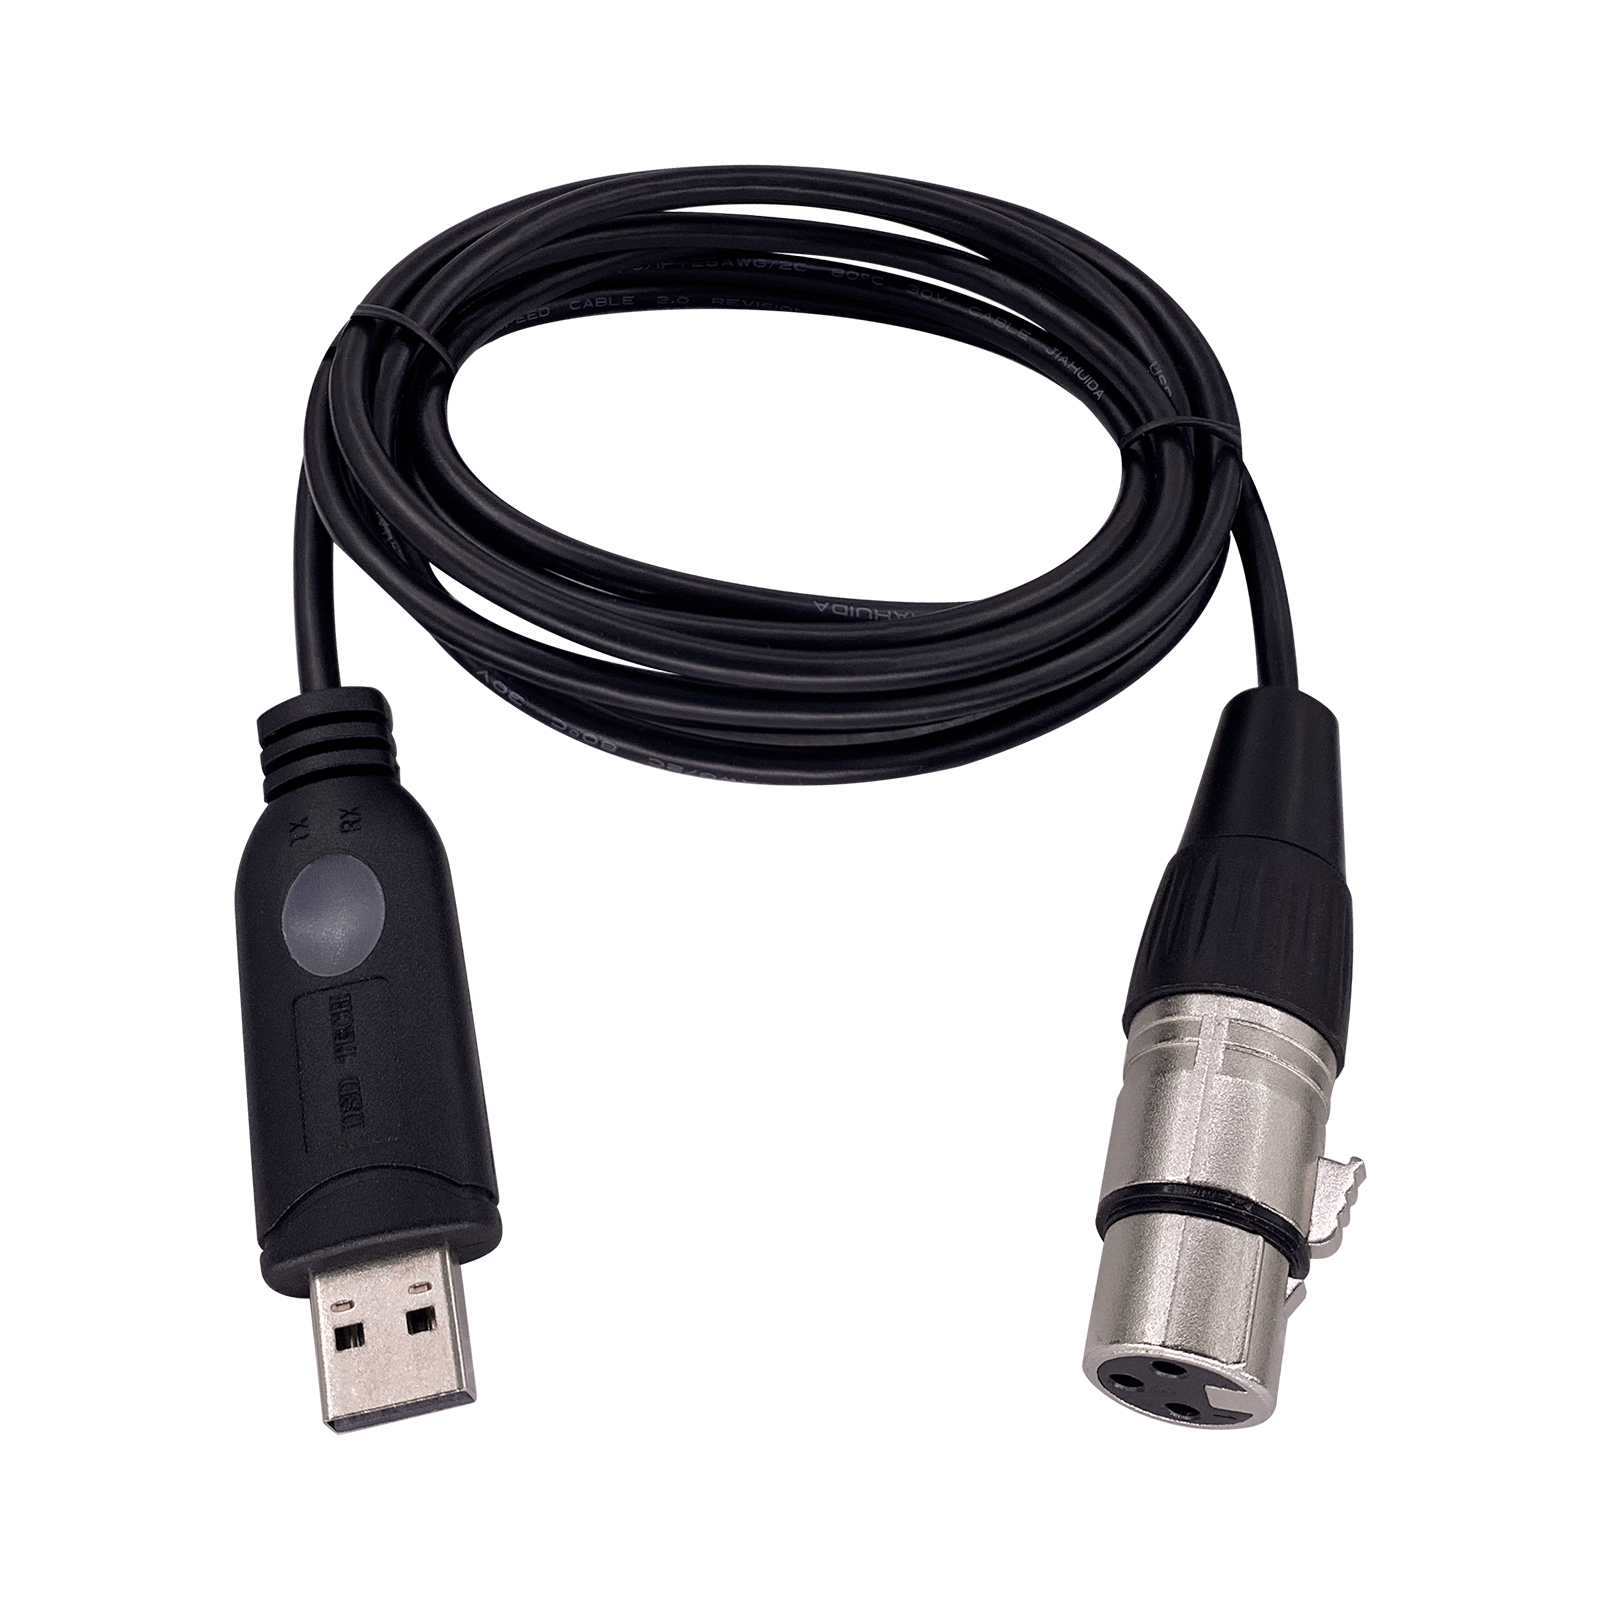 SH-AU20A USB to XLR Cable for Dynamic Microphones such as Shure(5.9FT)